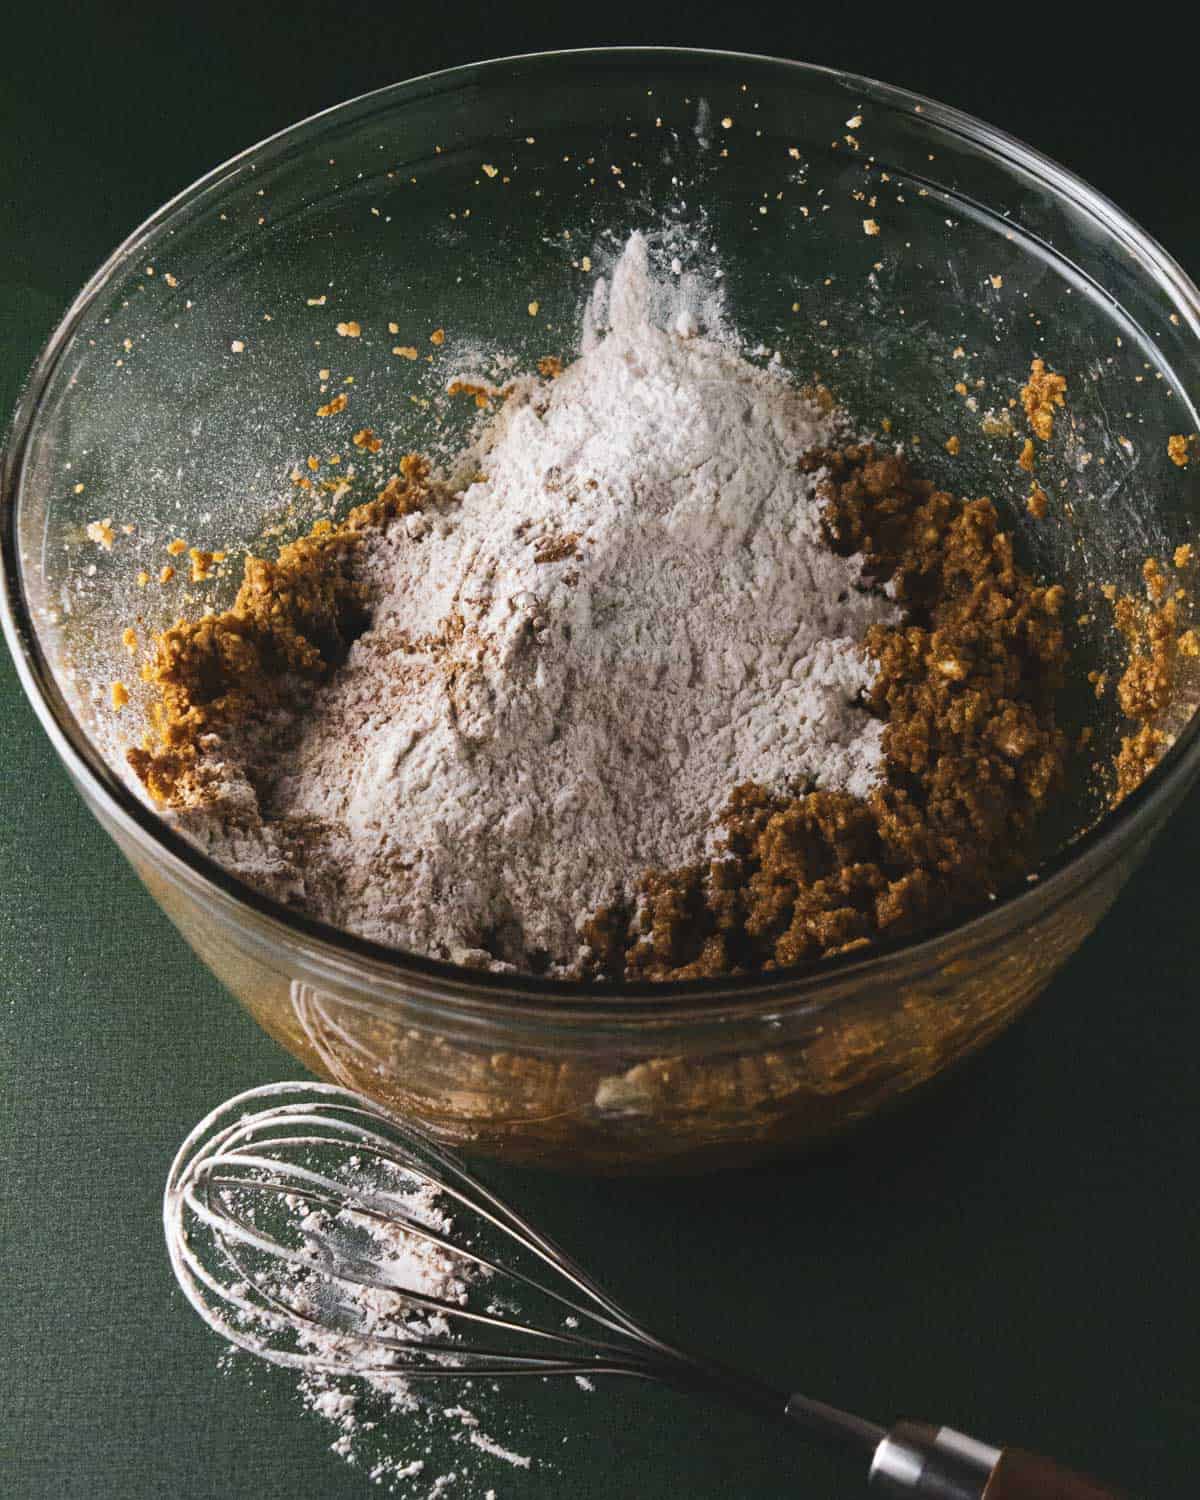 dry ingredients added to the cookie doughs glass mixing bowl